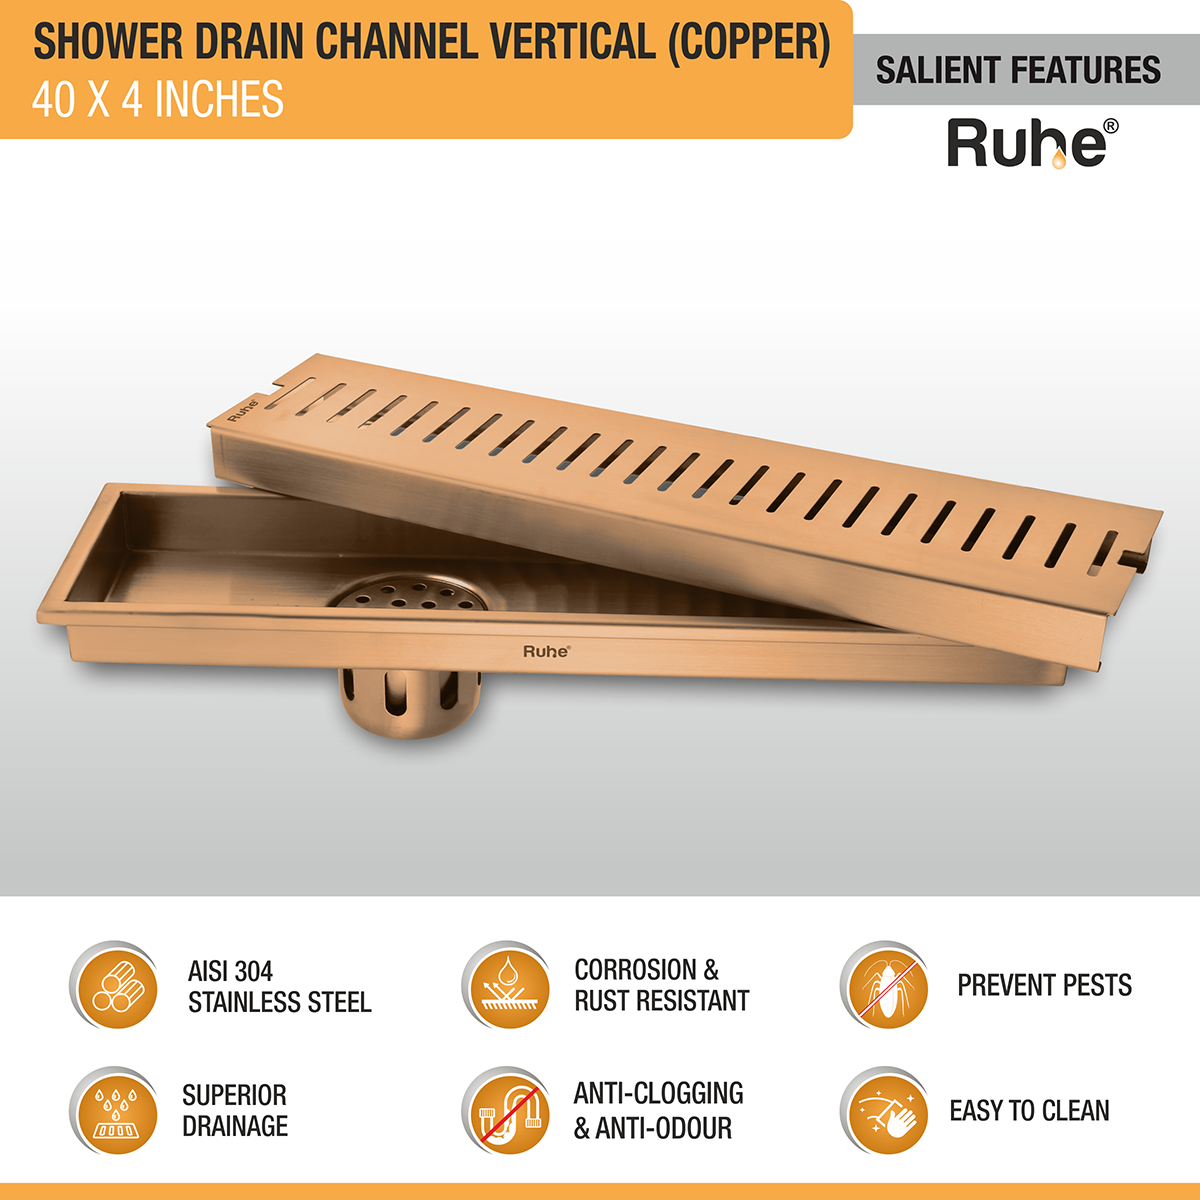 Vertical Shower Drain Channel (40 x 4 Inches) ROSE GOLD/ANTIQUE COPPER features